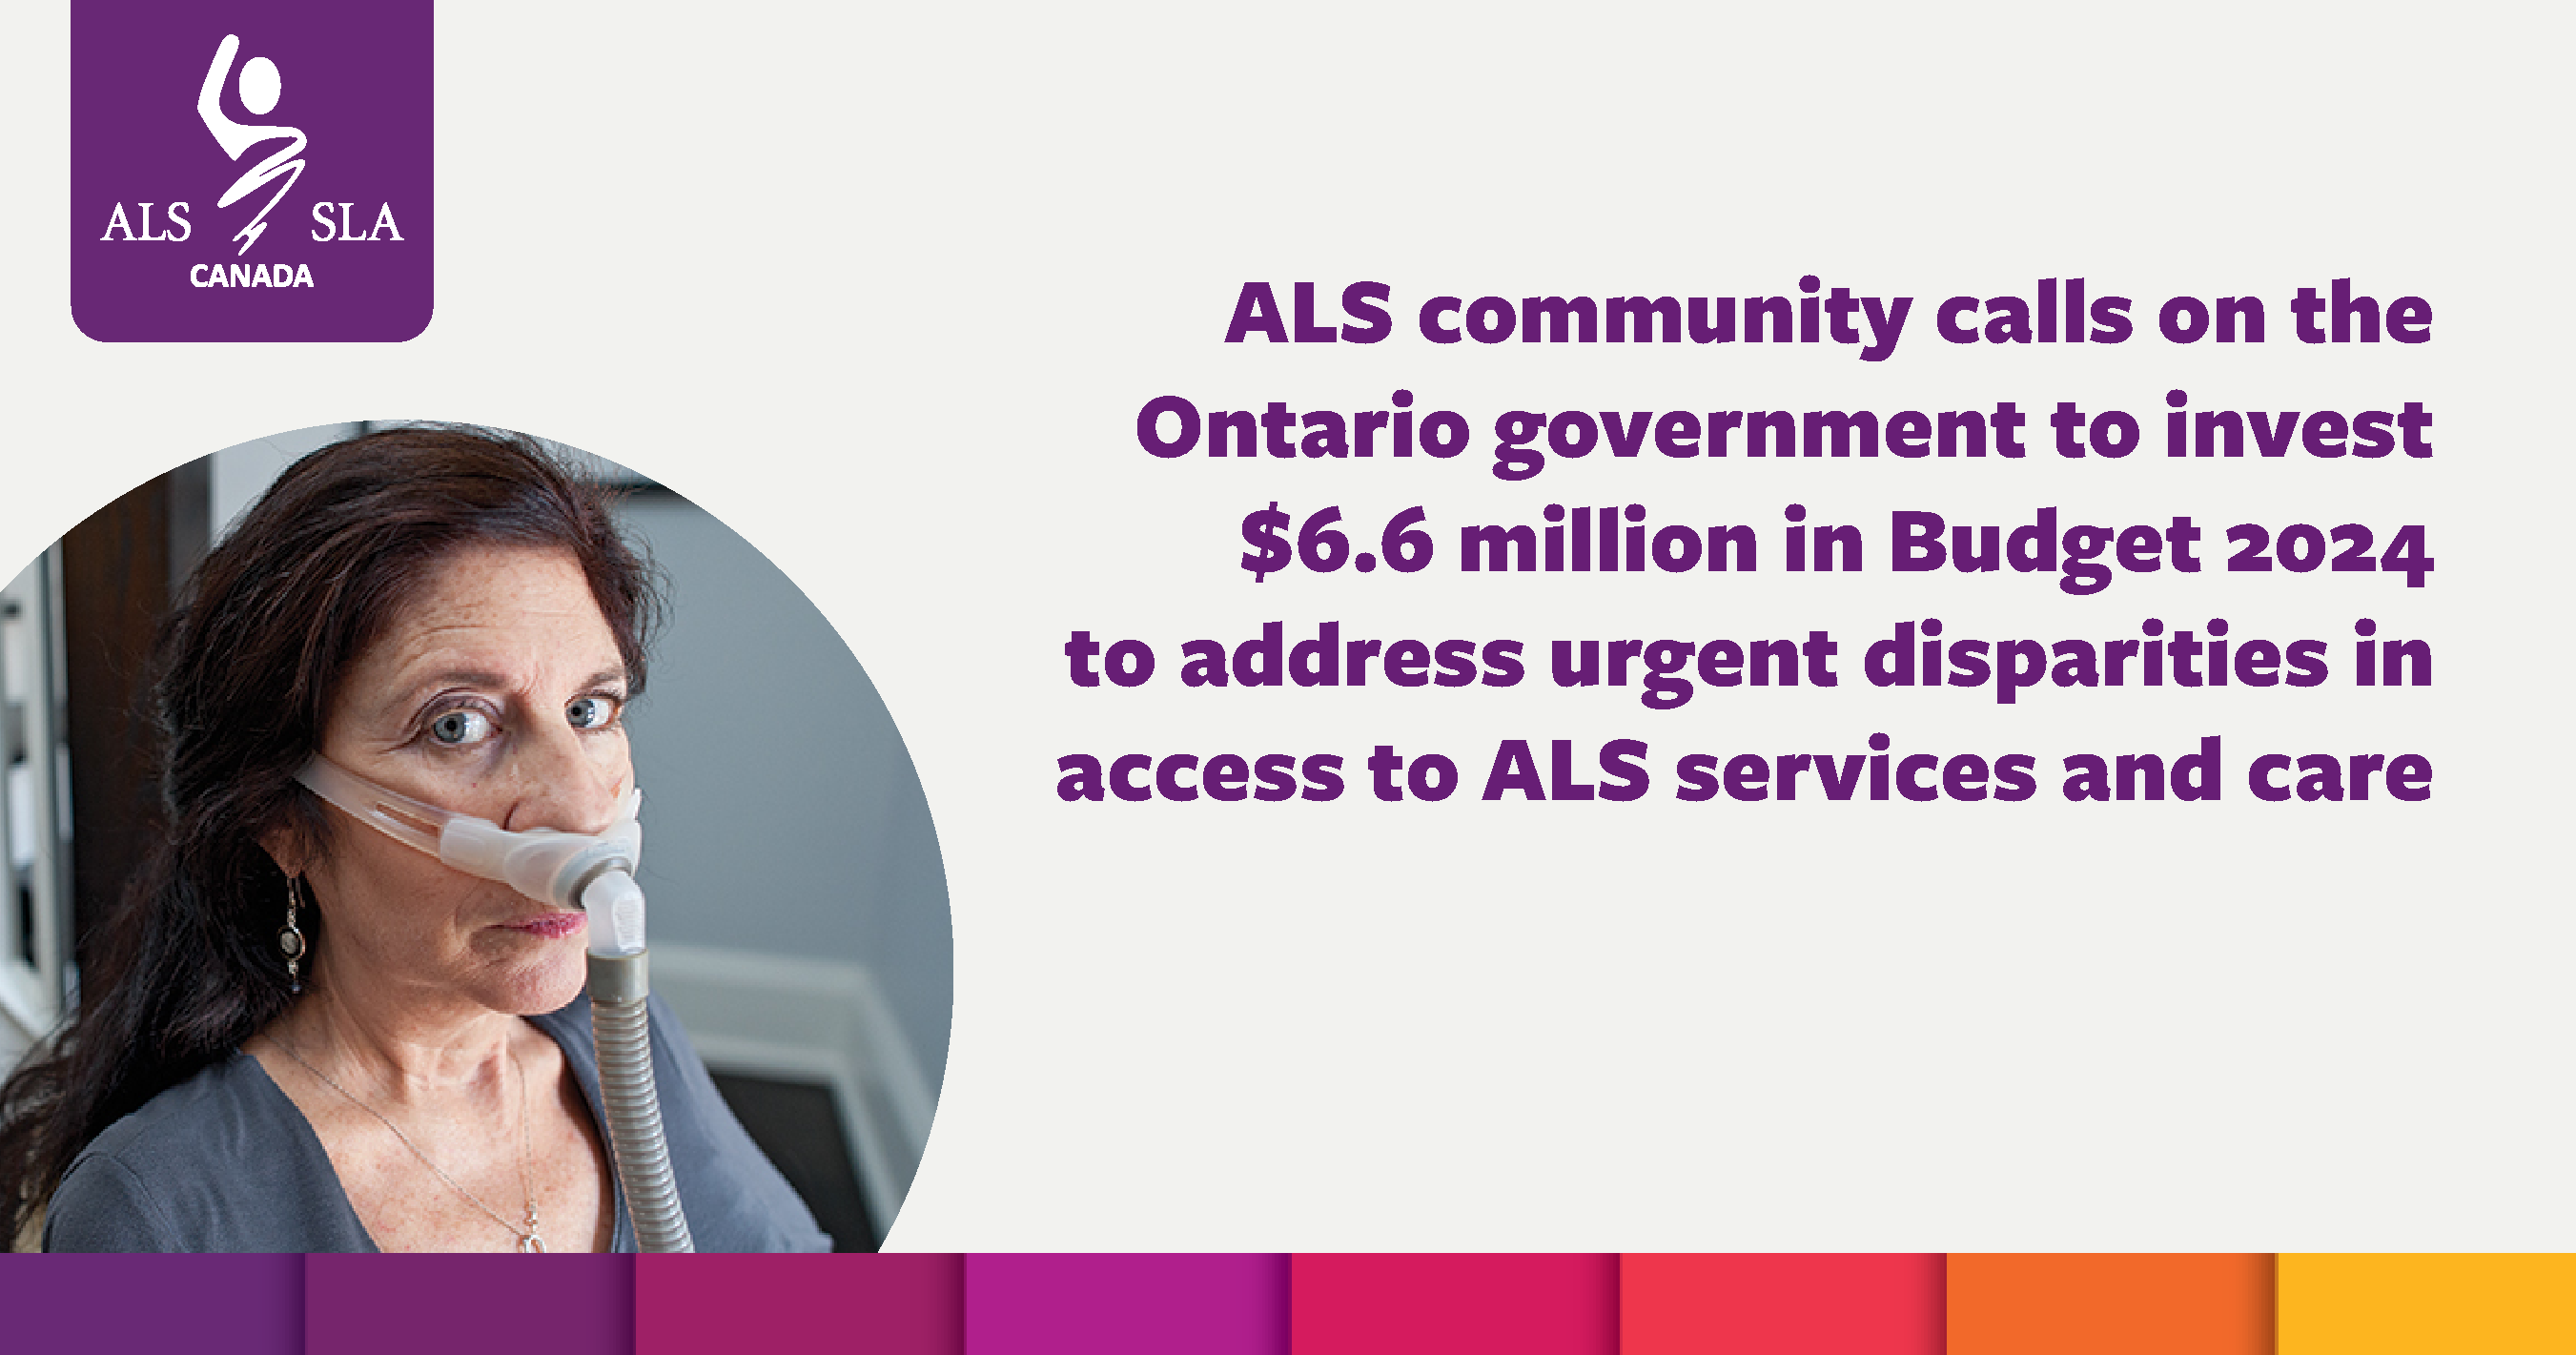  ALS community calls on the Ontario government to invest $6.6 million in Budget 2024 to address urgent disparities in access to ALS services and care